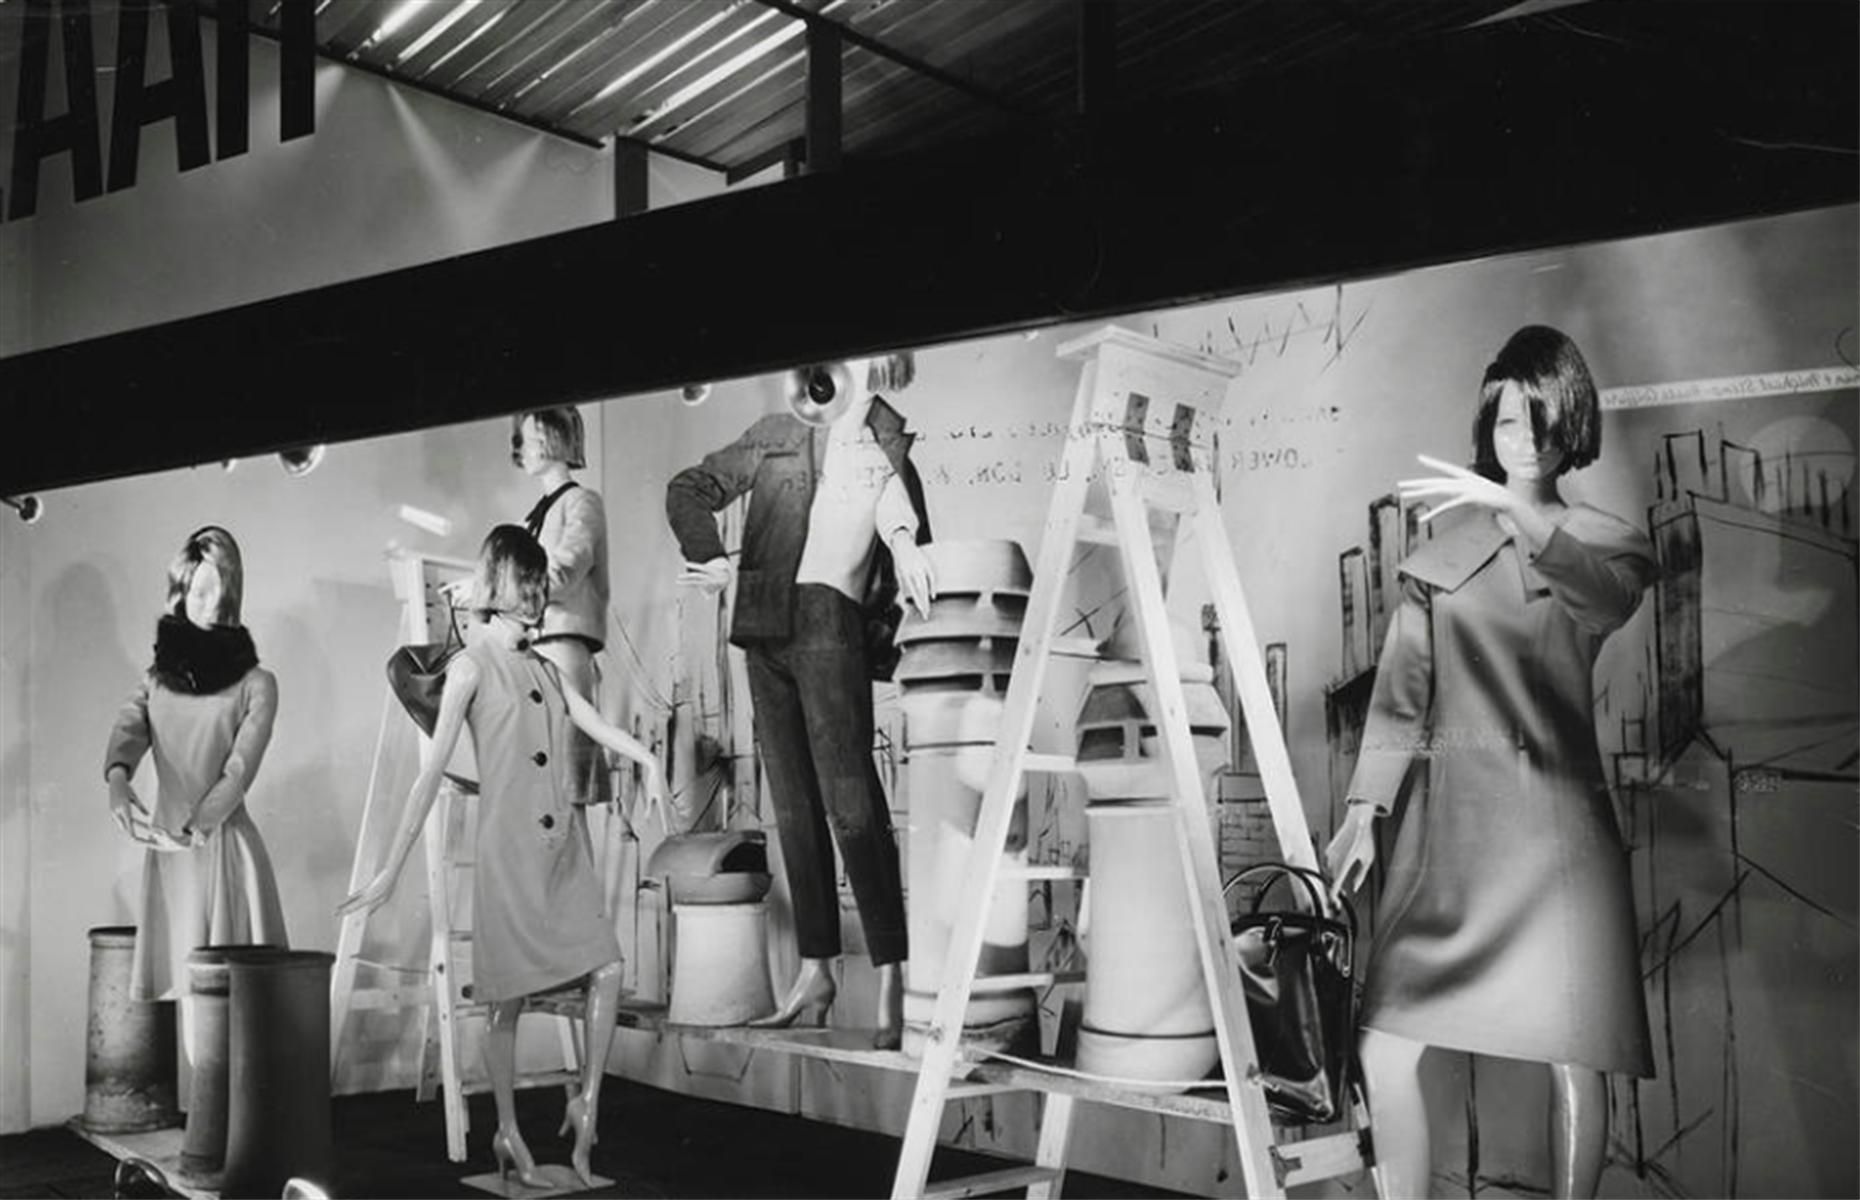 1955 – Bazaar by Mary Quant